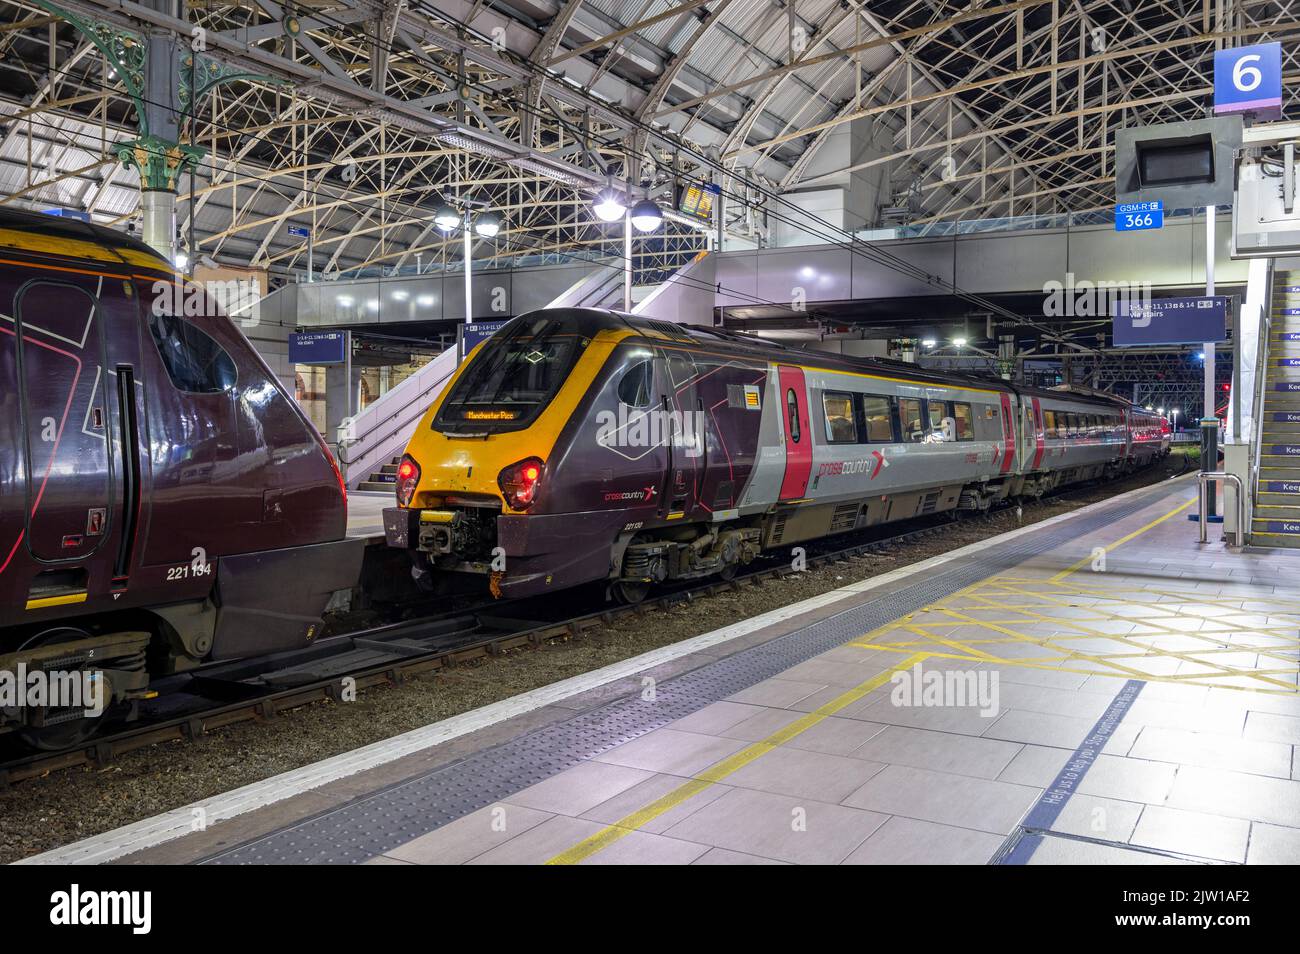 221130 221134 Crosscountry Voyagers pause at Manchester Piccadilly. 4th August 2022. By Tom McAtee..jpg - 2JW1AF2 Uploaded on : 02 Sep 2022 Stock Photo